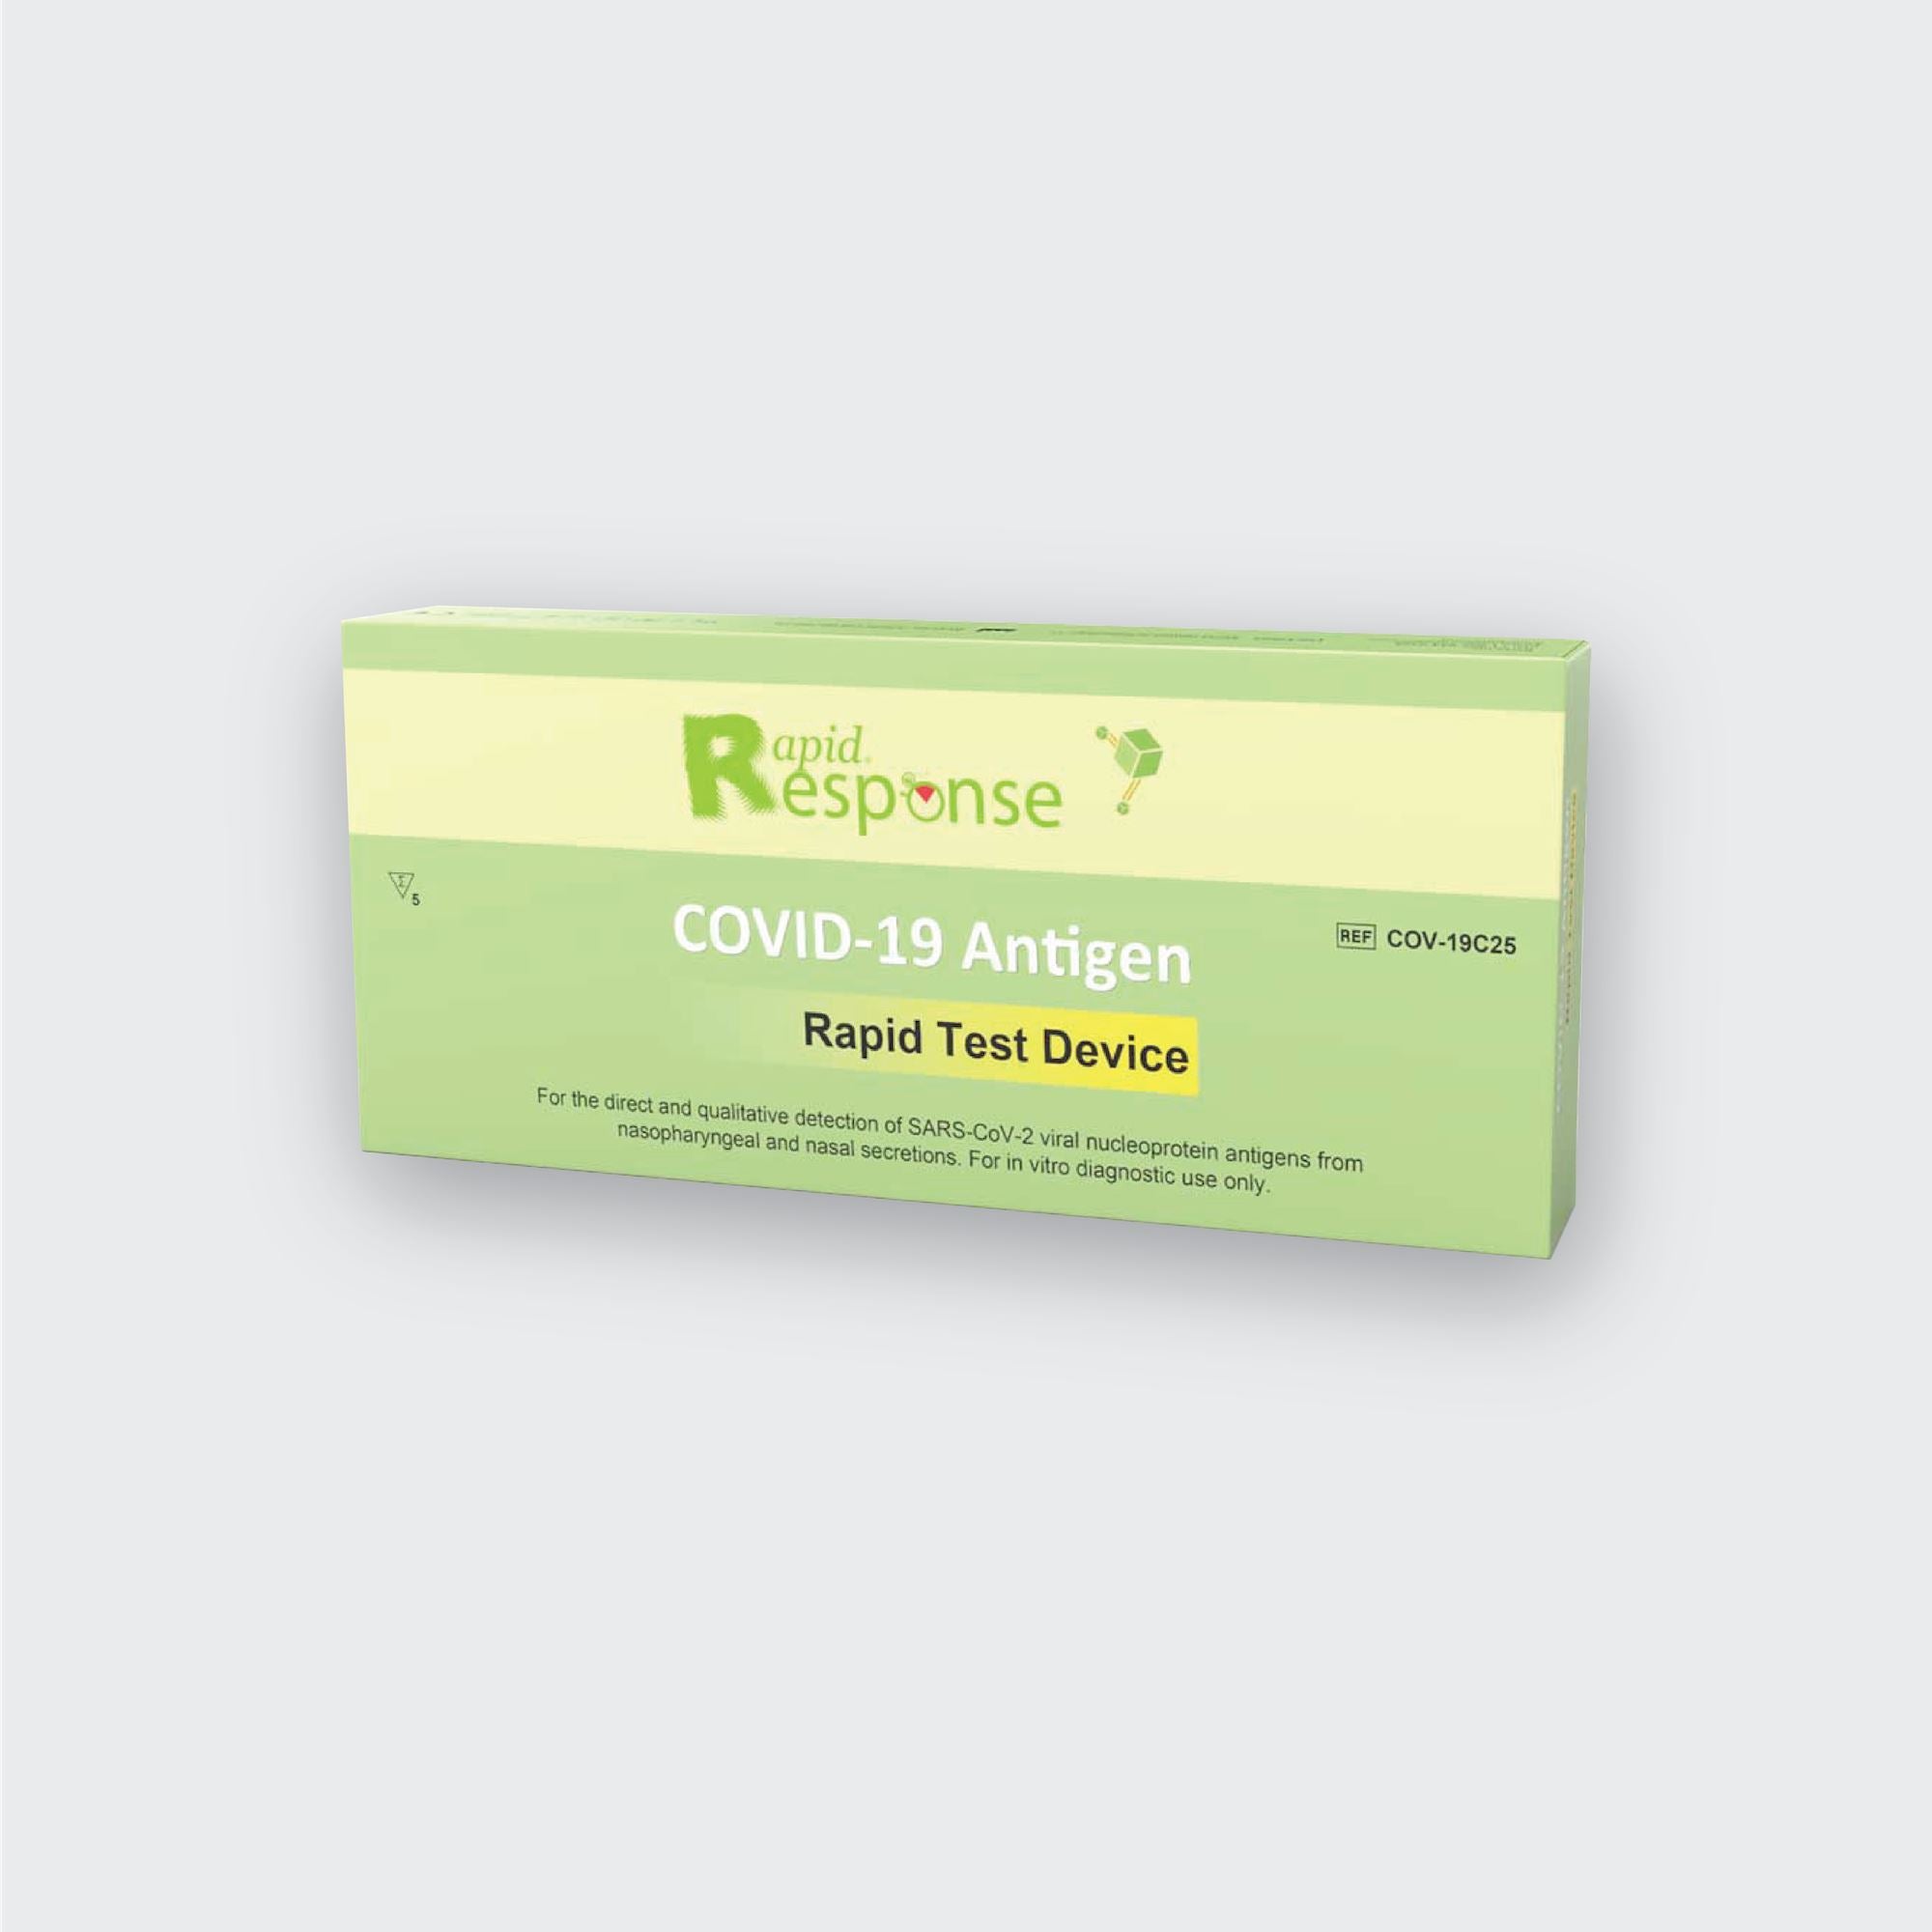 Health Canada warning Ontario residents Do Not Use - counterfeit COVID-19 Rapid Antigen Test kits - Stittsville Central - Local News, Events and Business